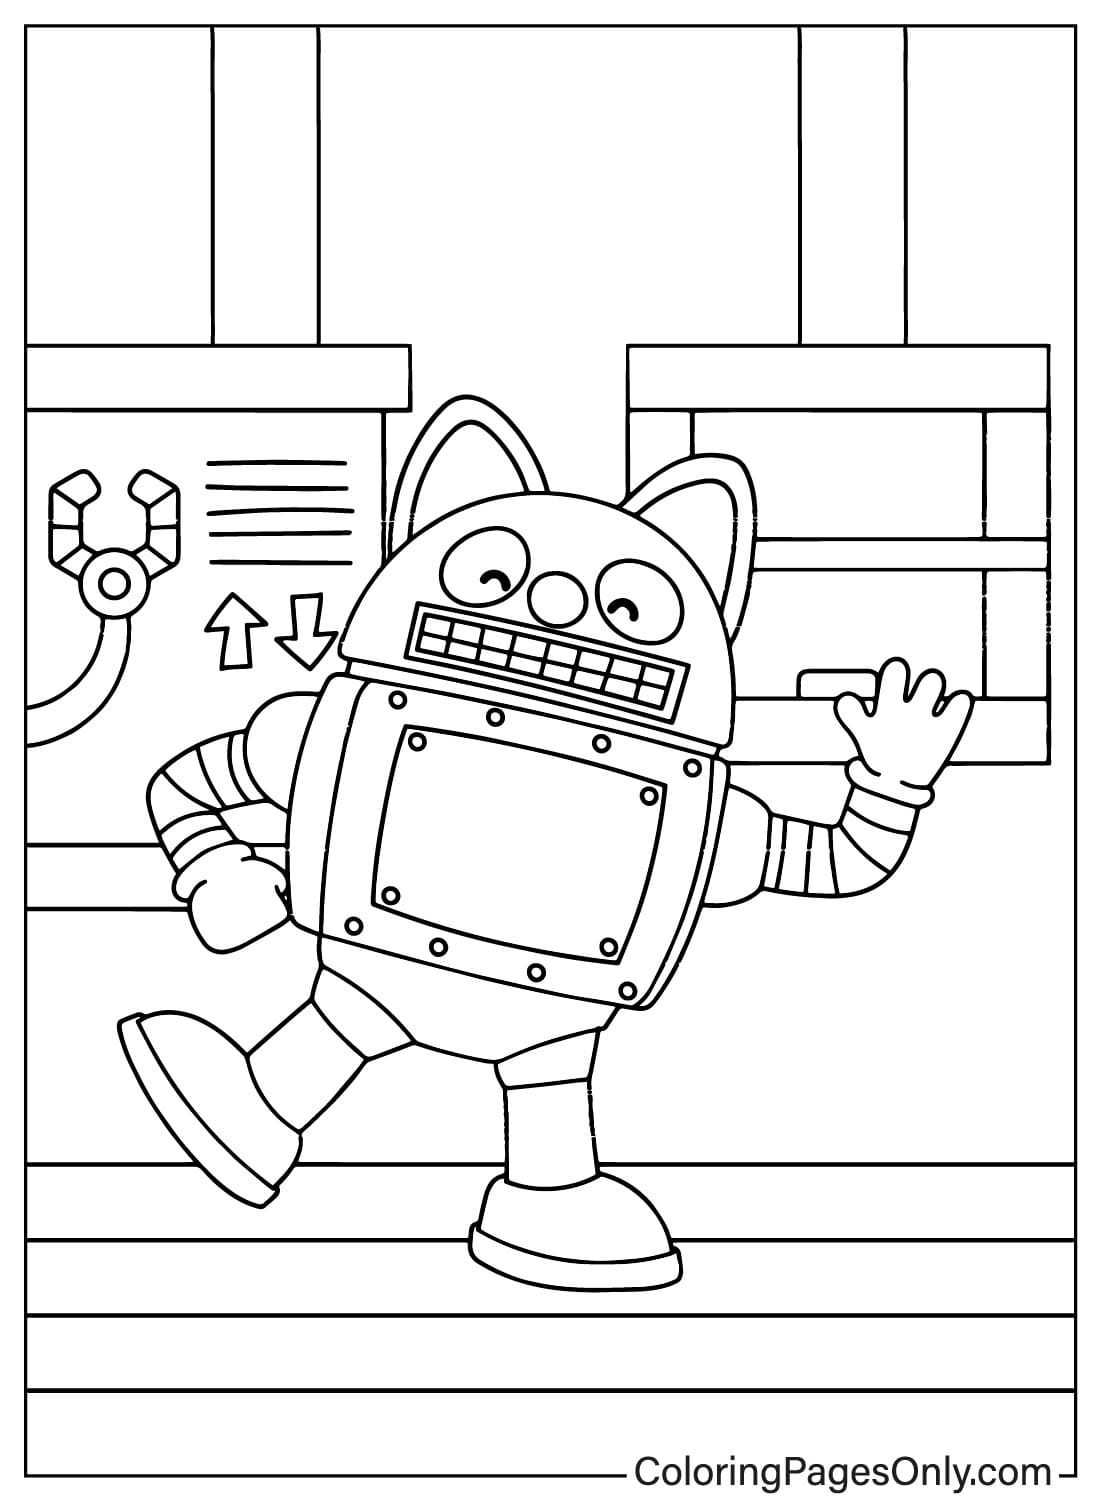 Rody Coloring Page from Pororo the Little Penguin